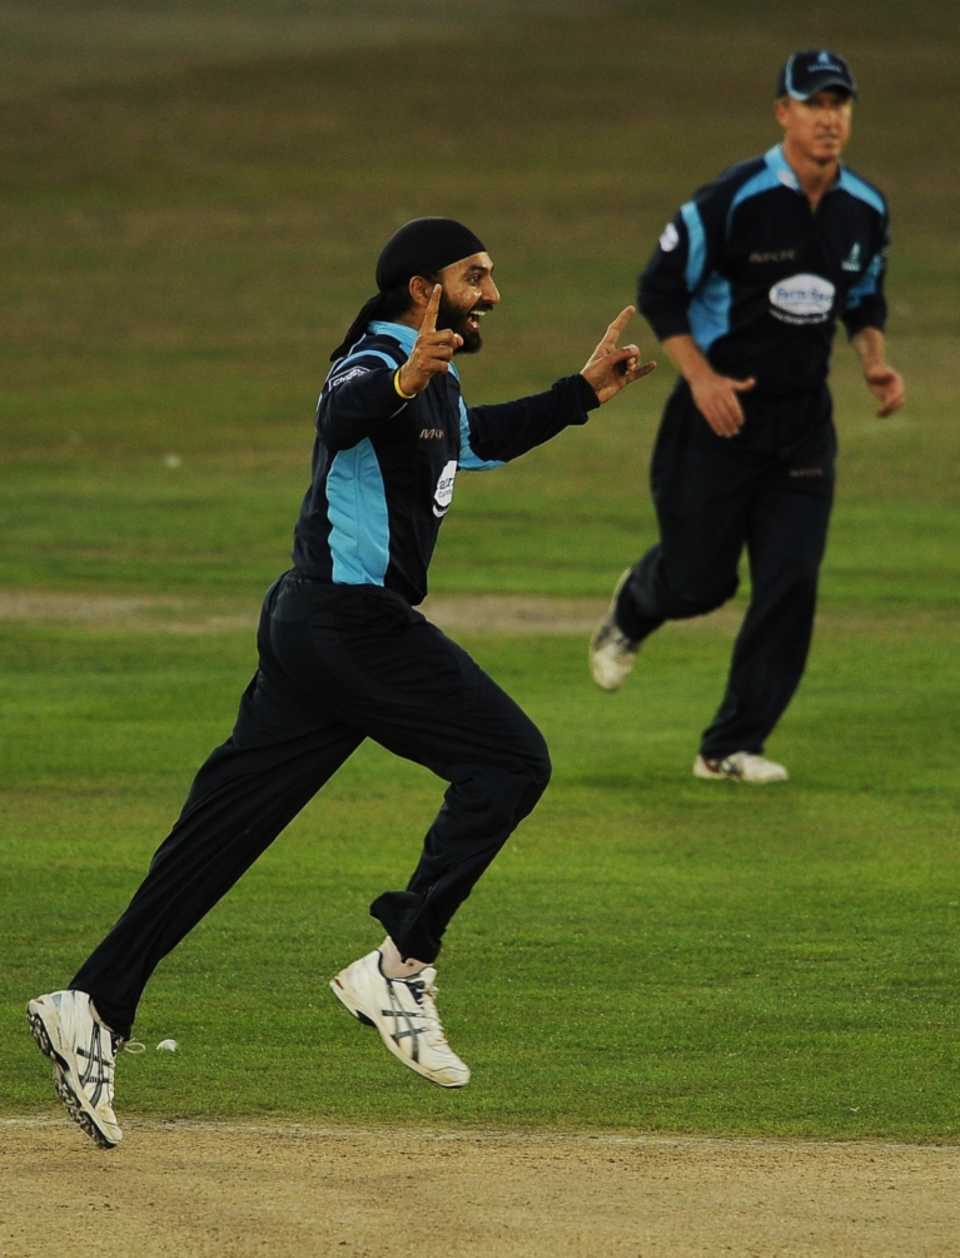 Monty Panesar was the best bowler on either side, finishing with 2 for 11 from eight overs, Sussex v Worcestershire, Clydesdale Bank 40, Hove, July 19,2010